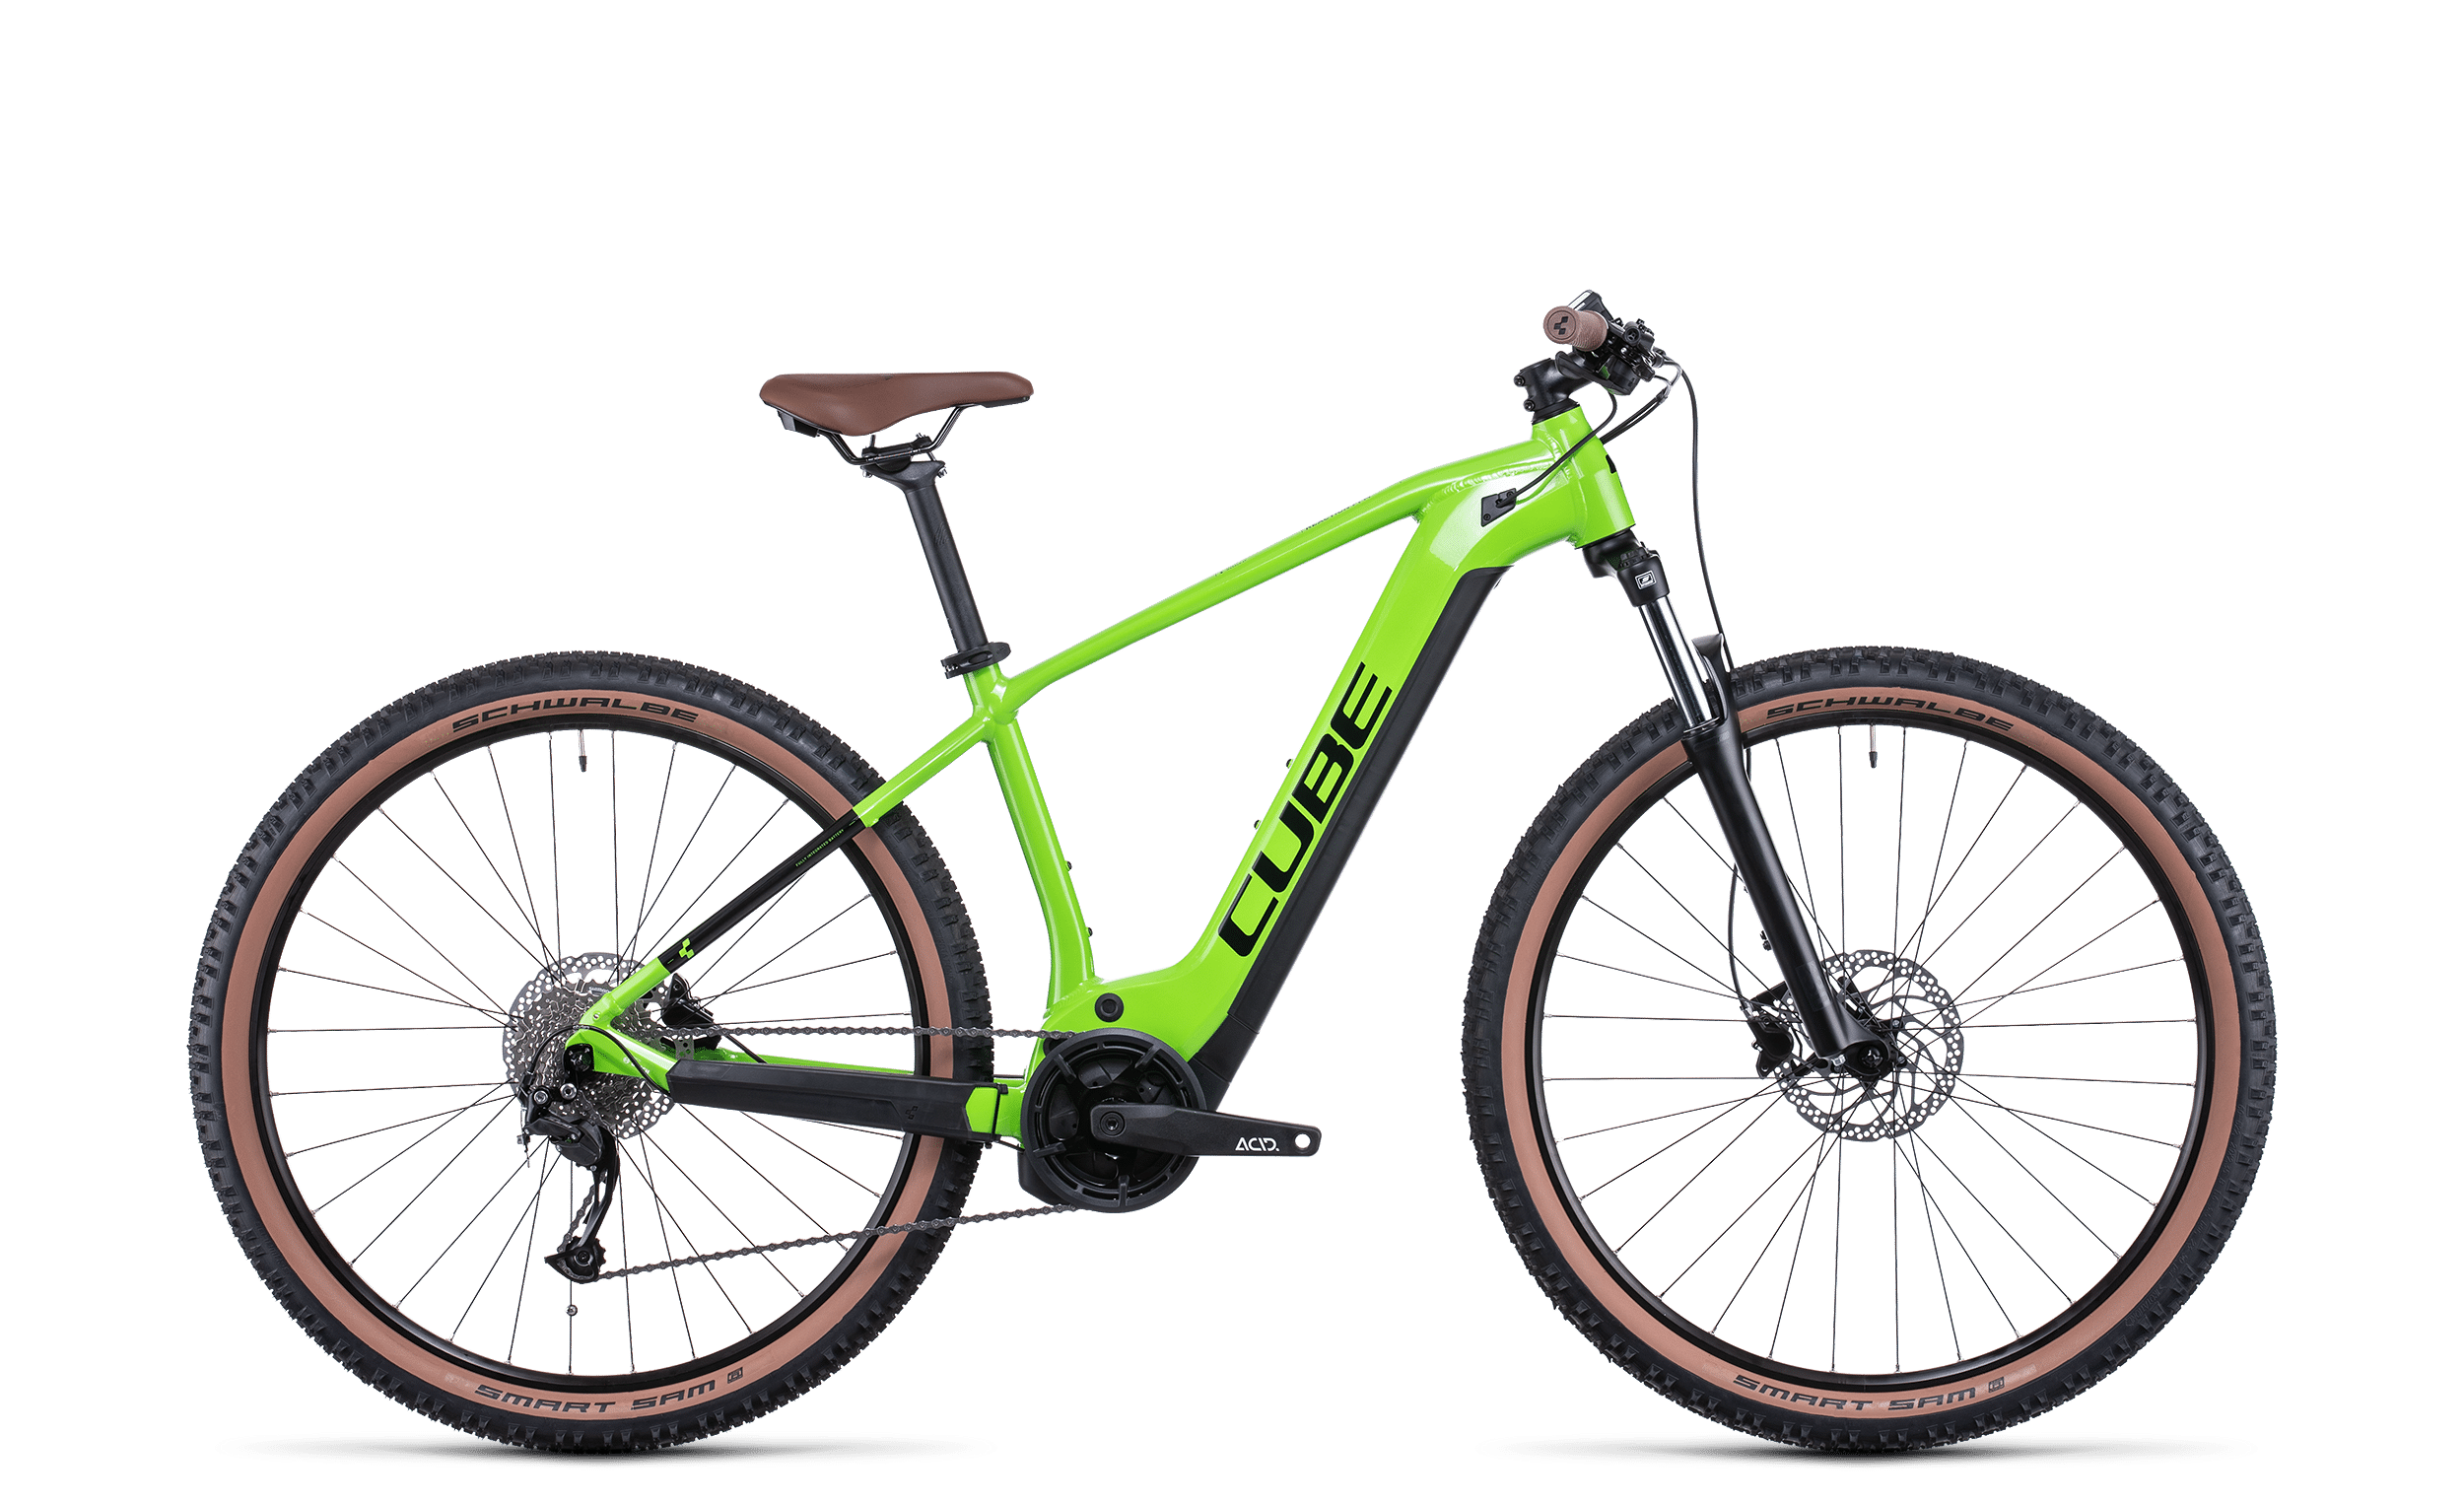 https://cube-bikes.ca/wp-content/uploads/2021/11/Cube-Reaction-Hybrid-Performance-500-shinyapple-black-595400_side-view.png